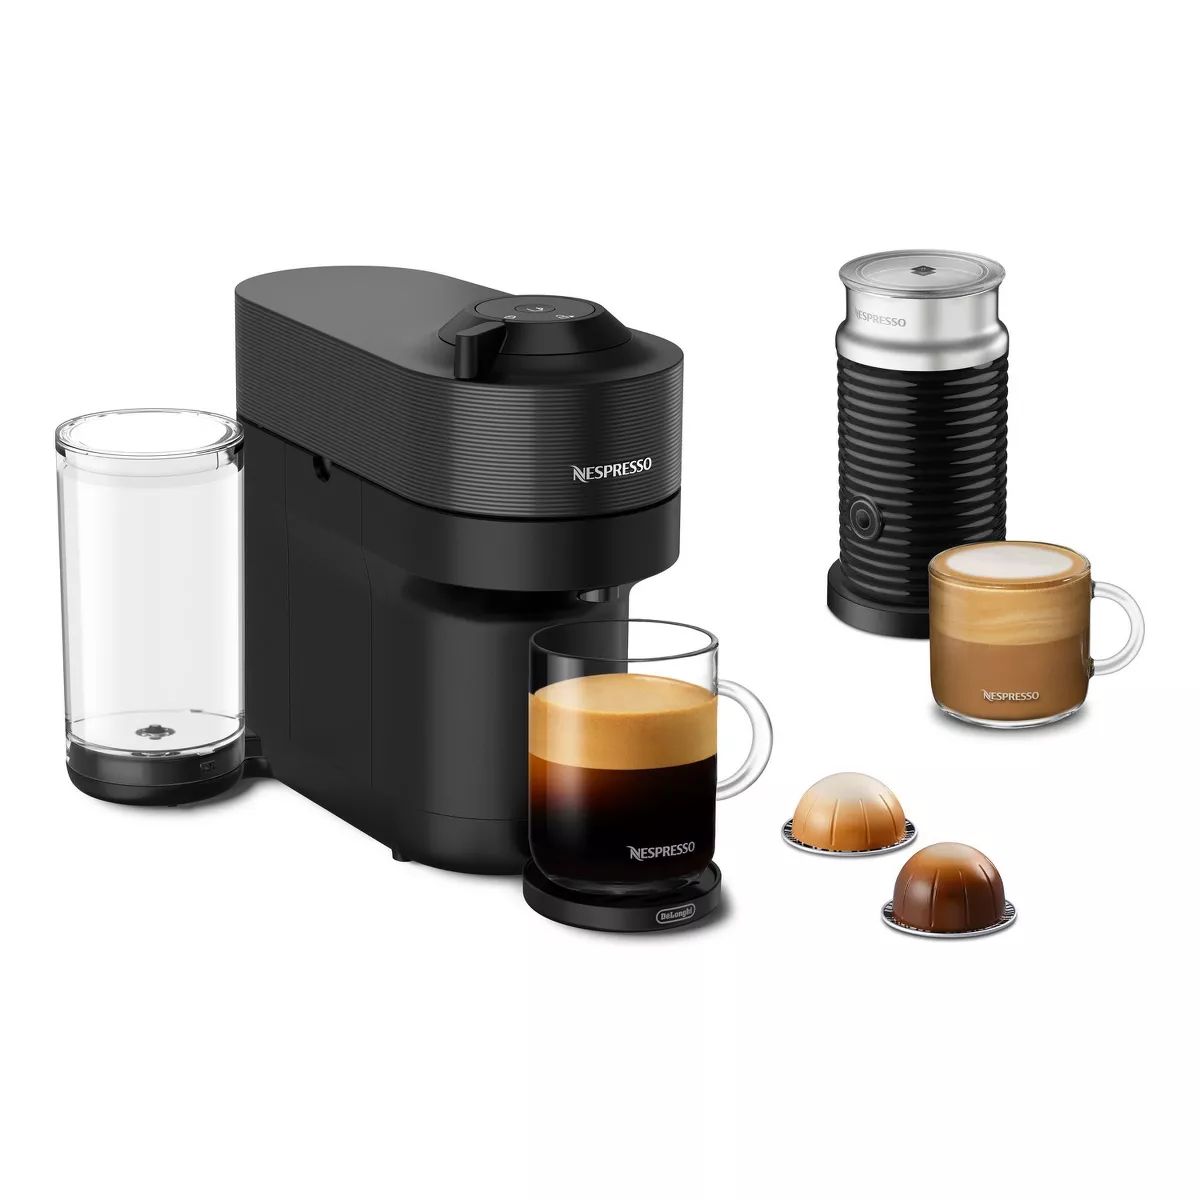 Nespresso Vertuo Pop+ Combination Espresso and Coffee Maker with Milk Frother | Target